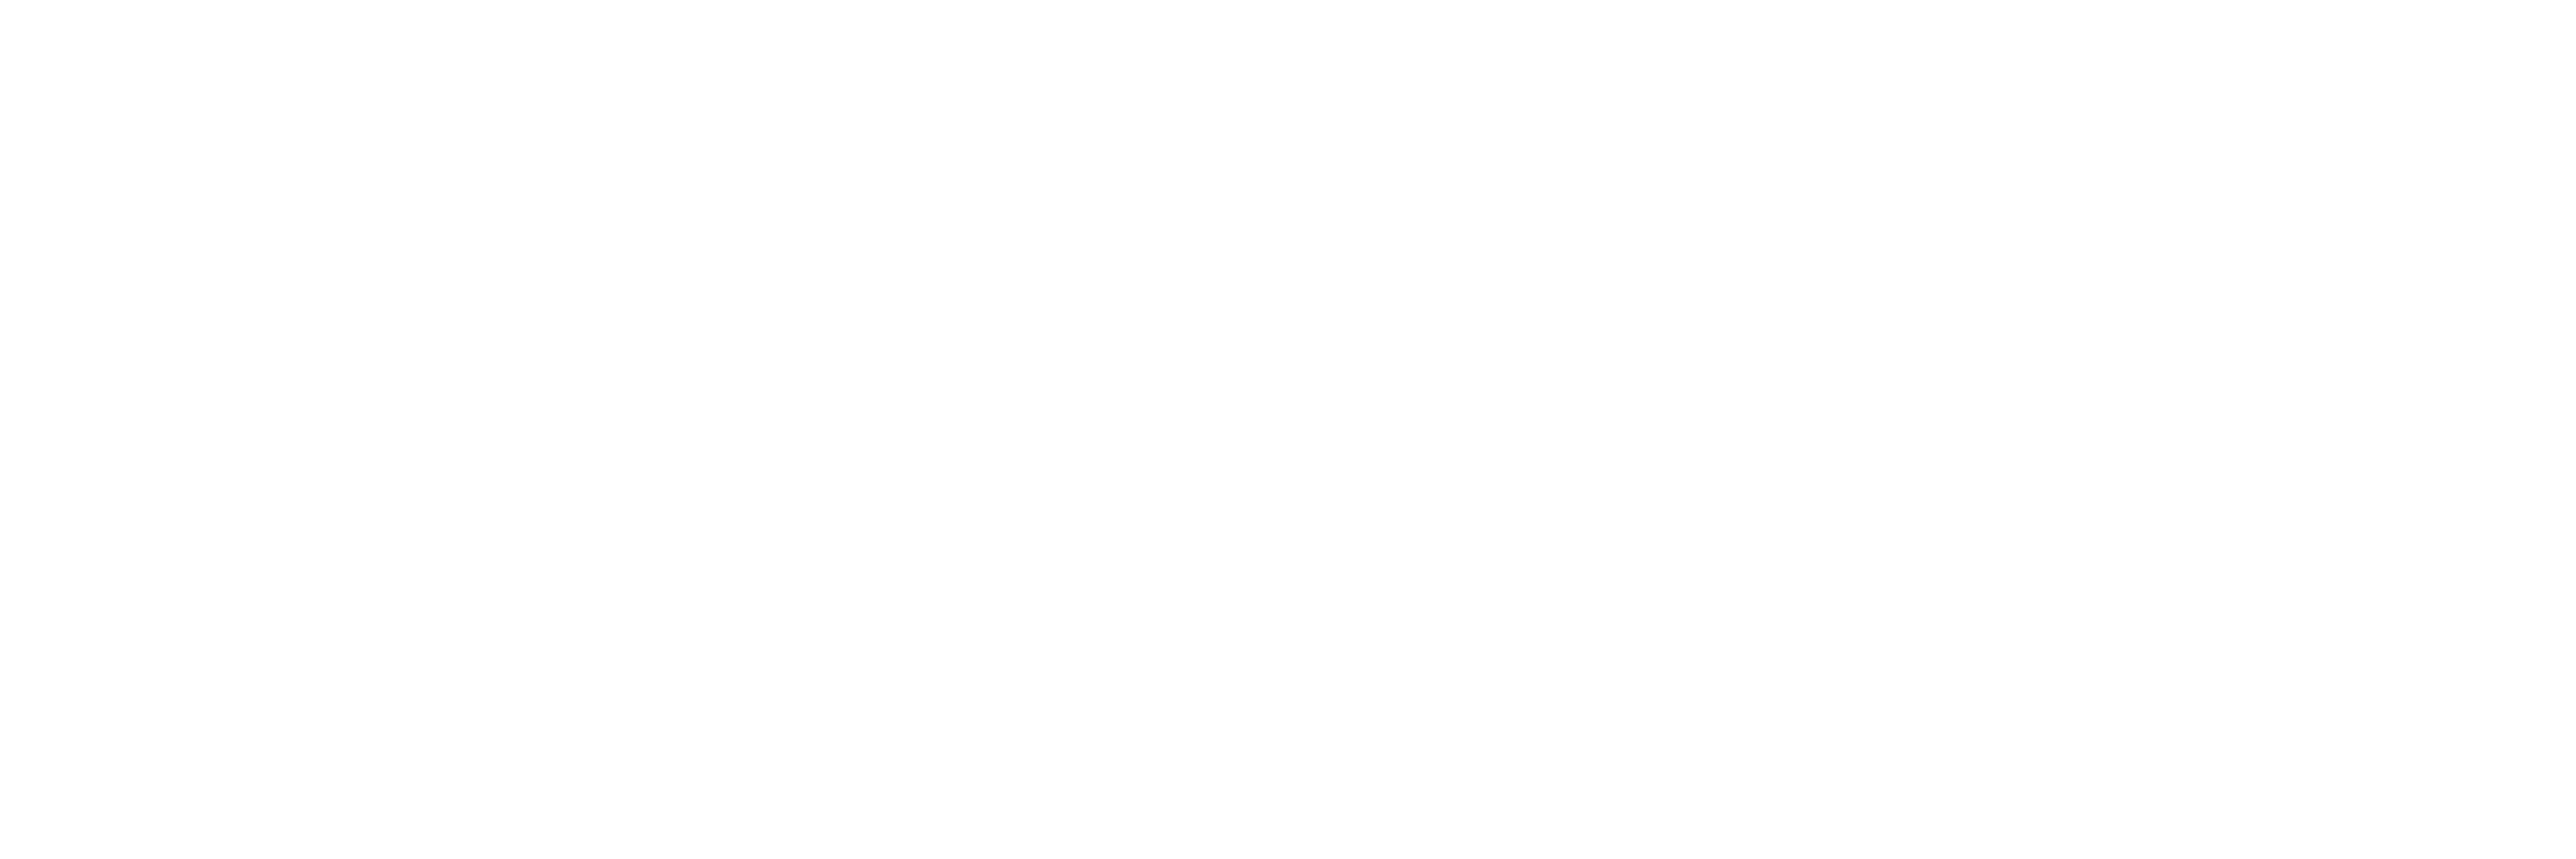 Annenberg Space for Photography Logo